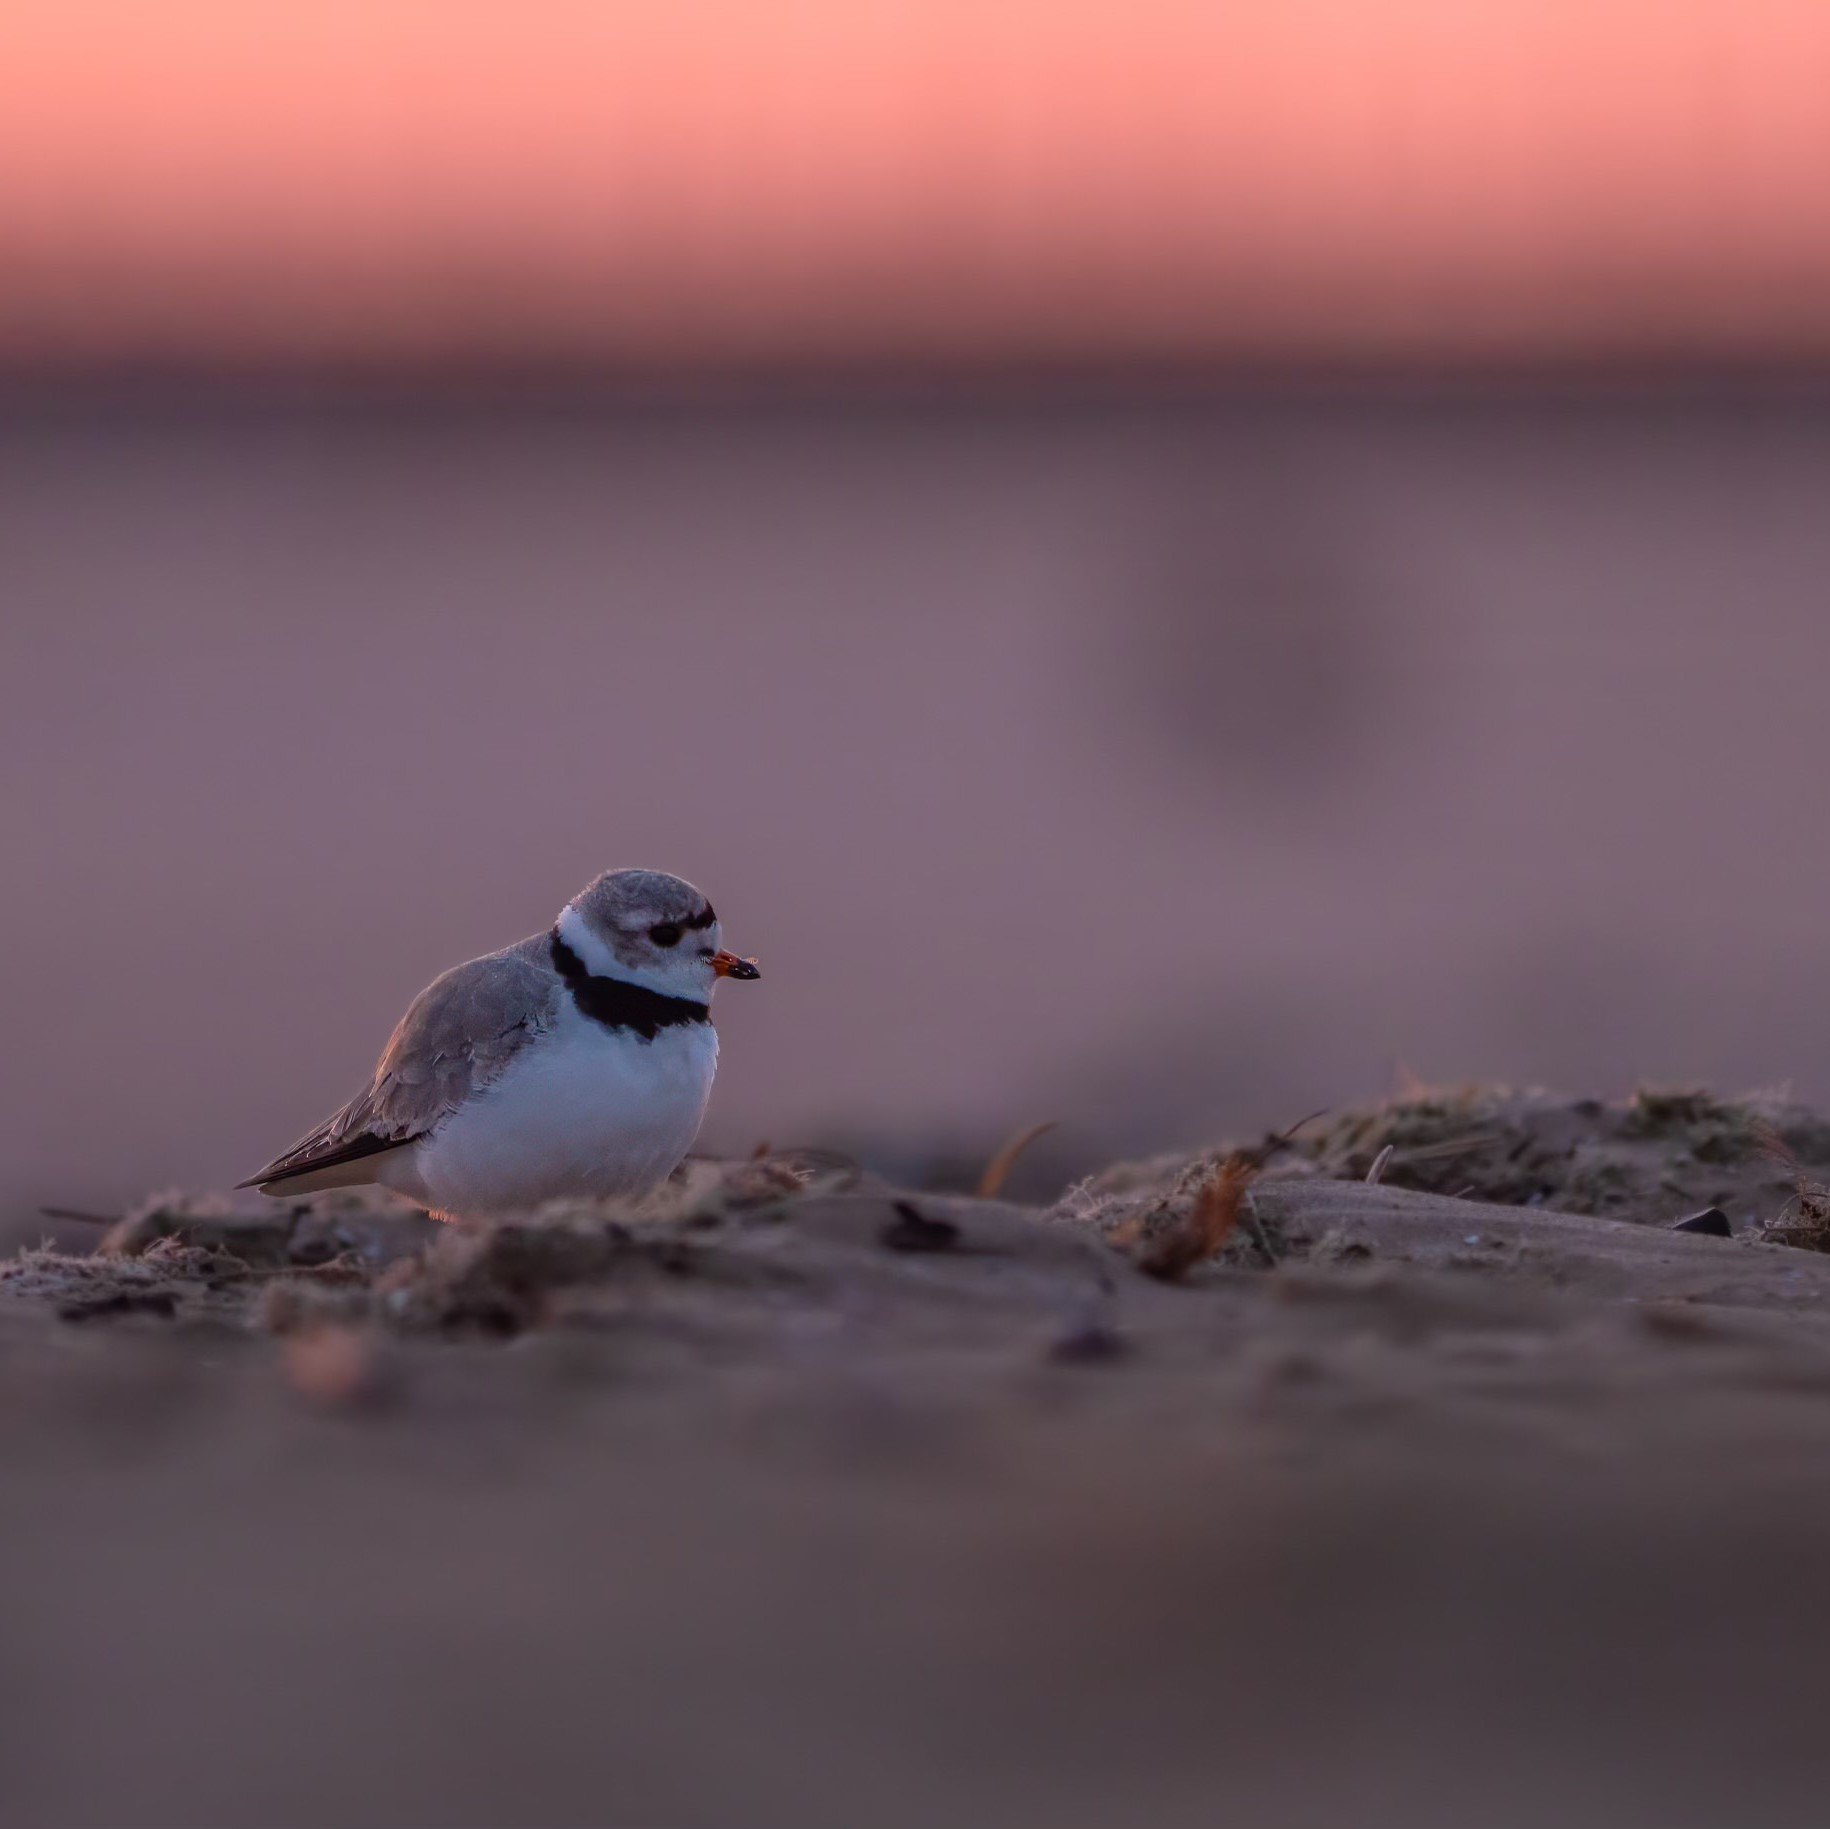 Birdwatchers rejoice as Imani the piping plover returns to Chicago